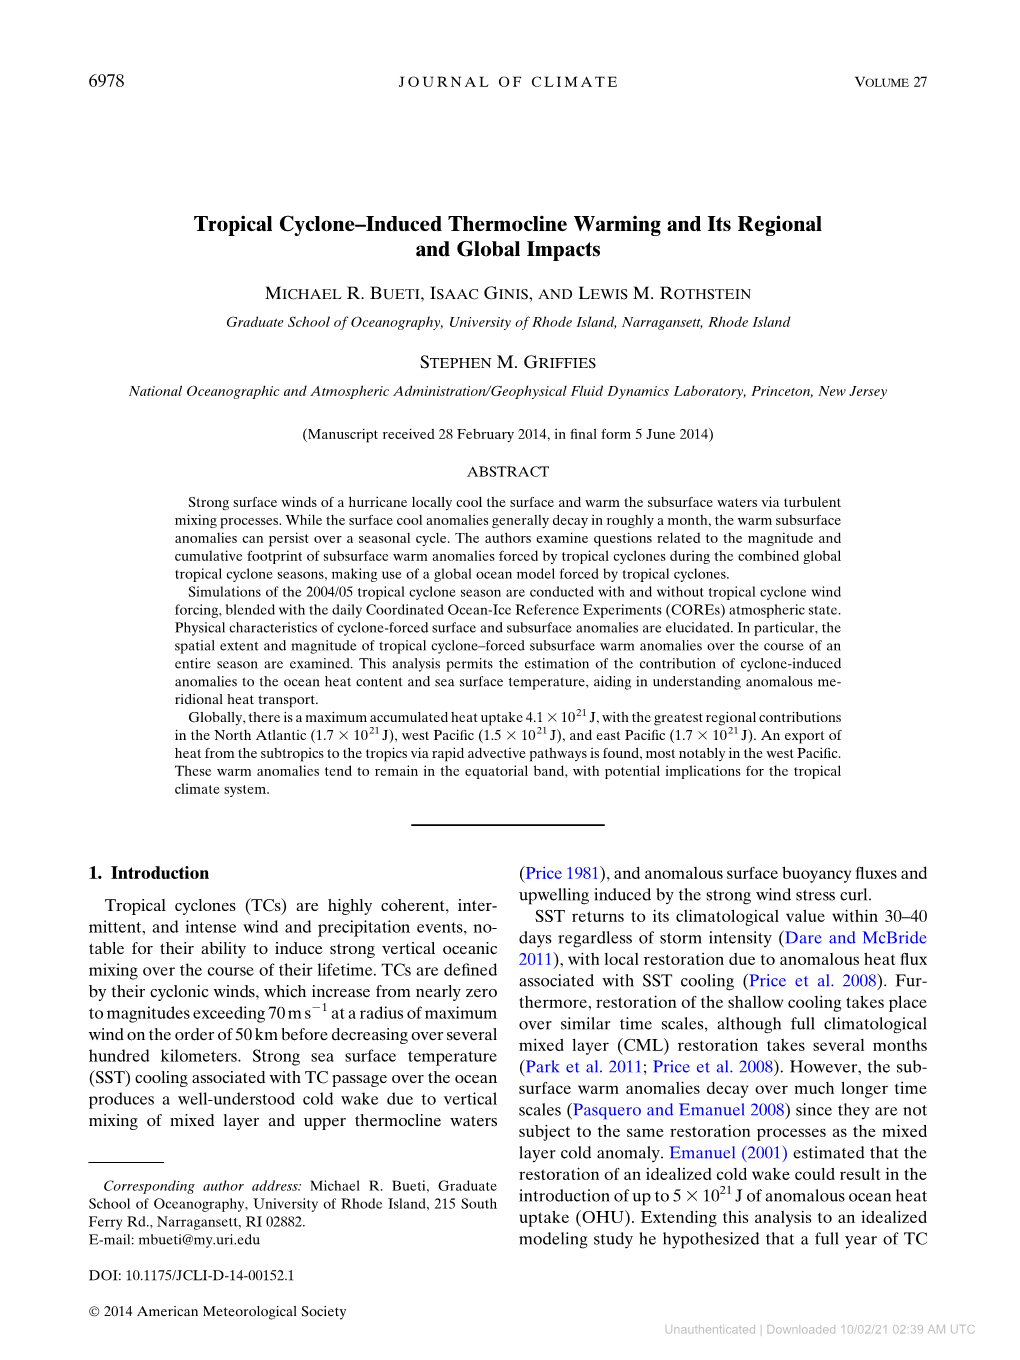 Tropical Cyclone–Induced Thermocline Warming and Its Regional and Global Impacts